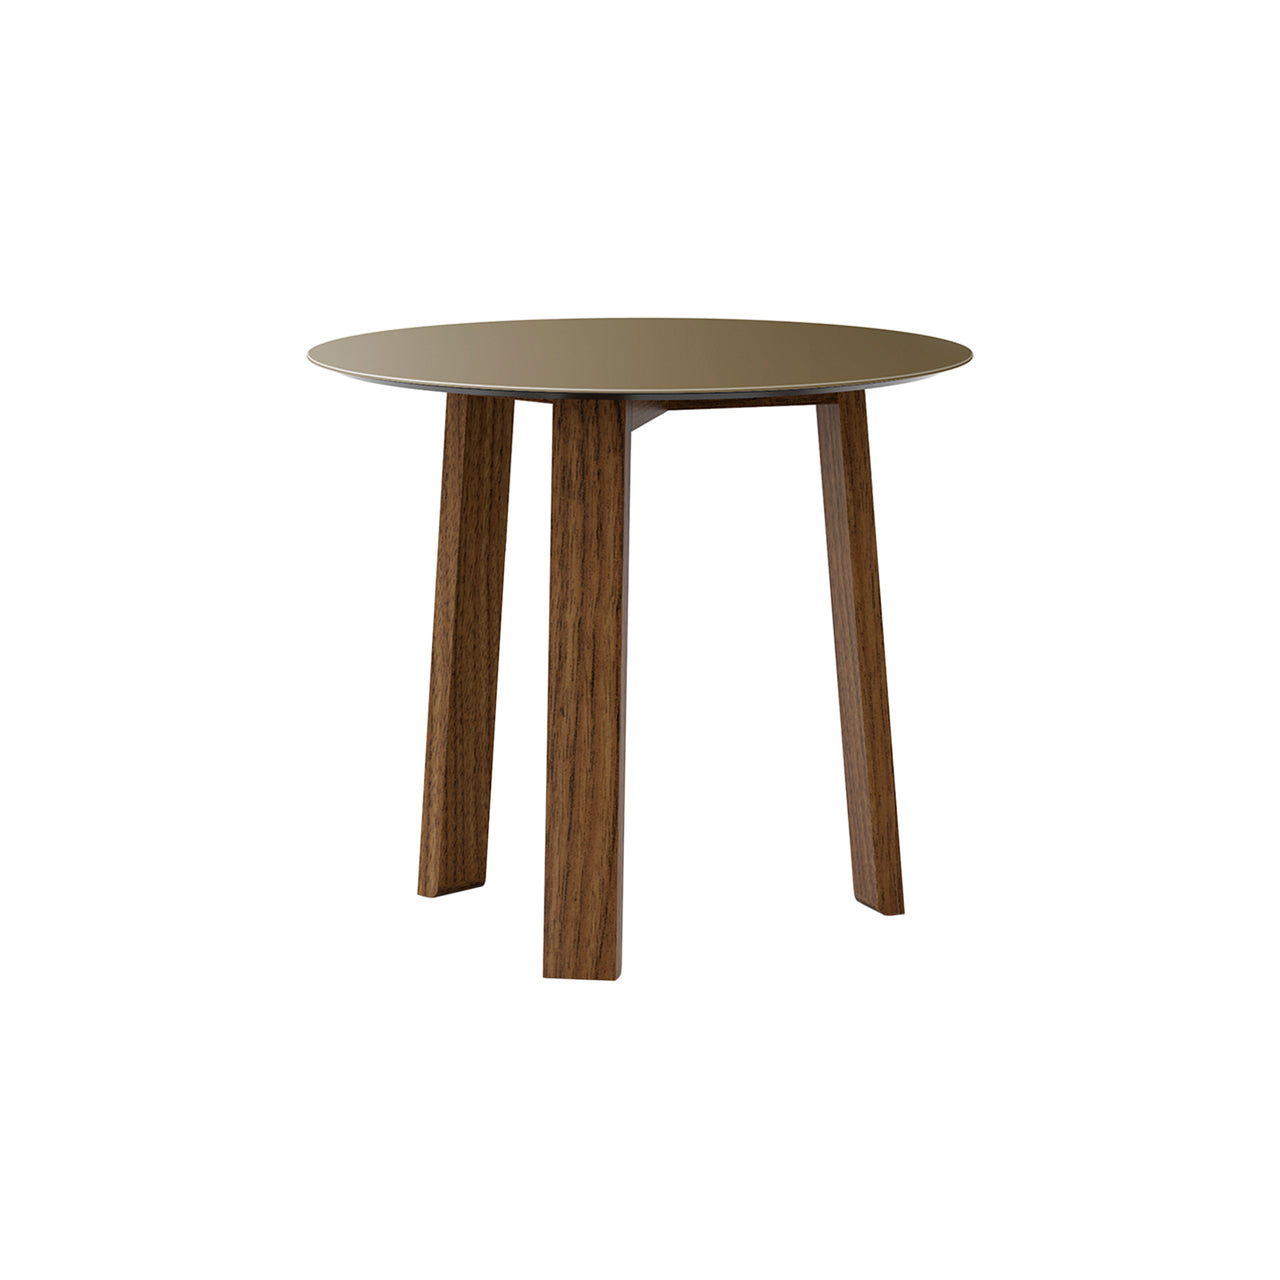 Stockholm Round Side Table: Low + Bronze Anodised Aluminum + Walnut Stained Walnut